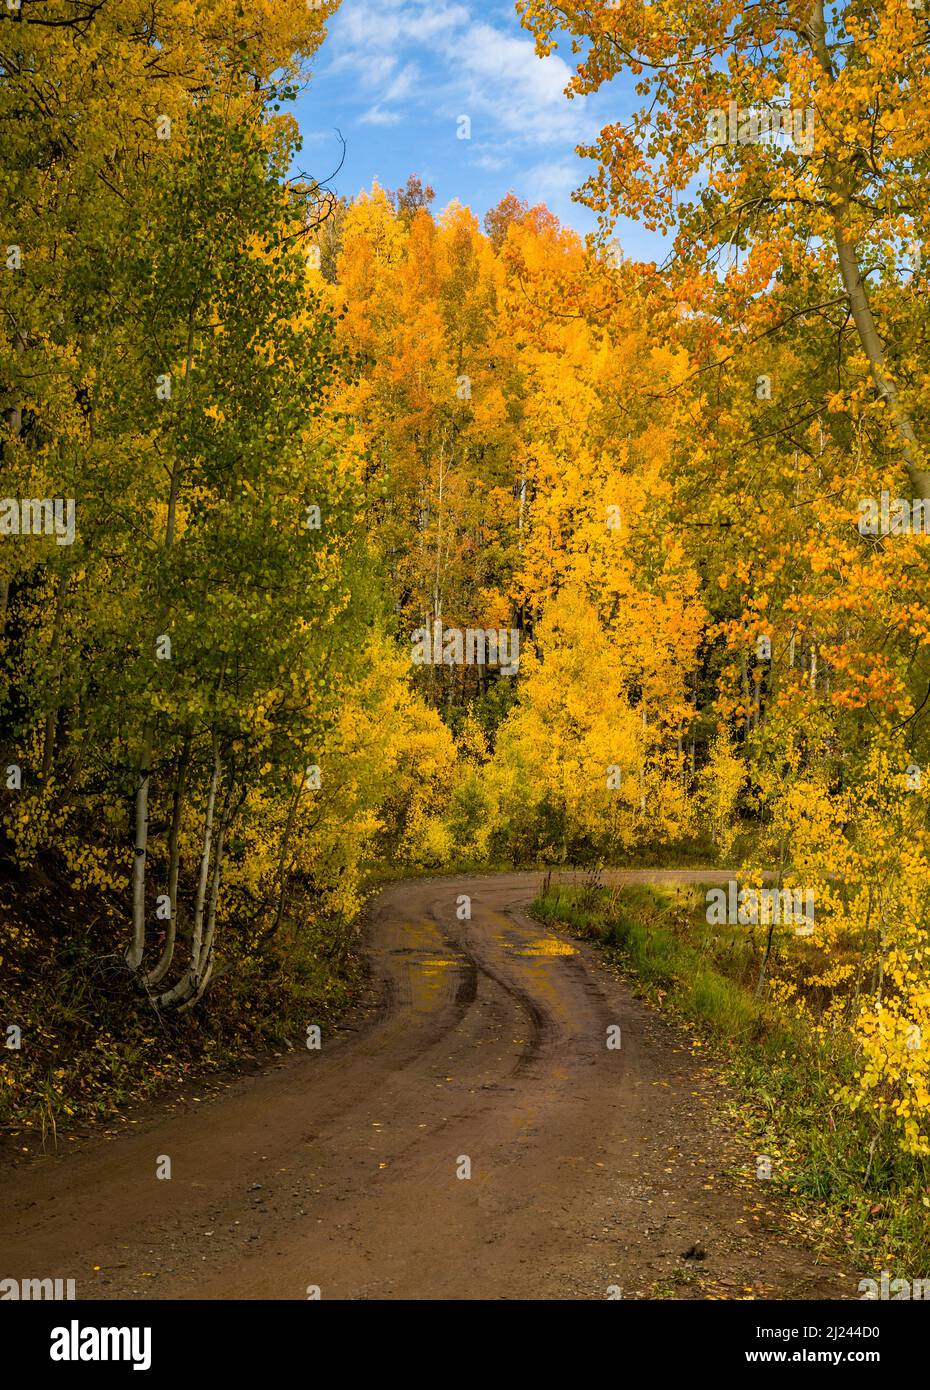 A dirt road, wet with recent rain, travels through a forest of aspen trees of many autumn colors in the Rocky Mountains of Colorado. Stock Photo